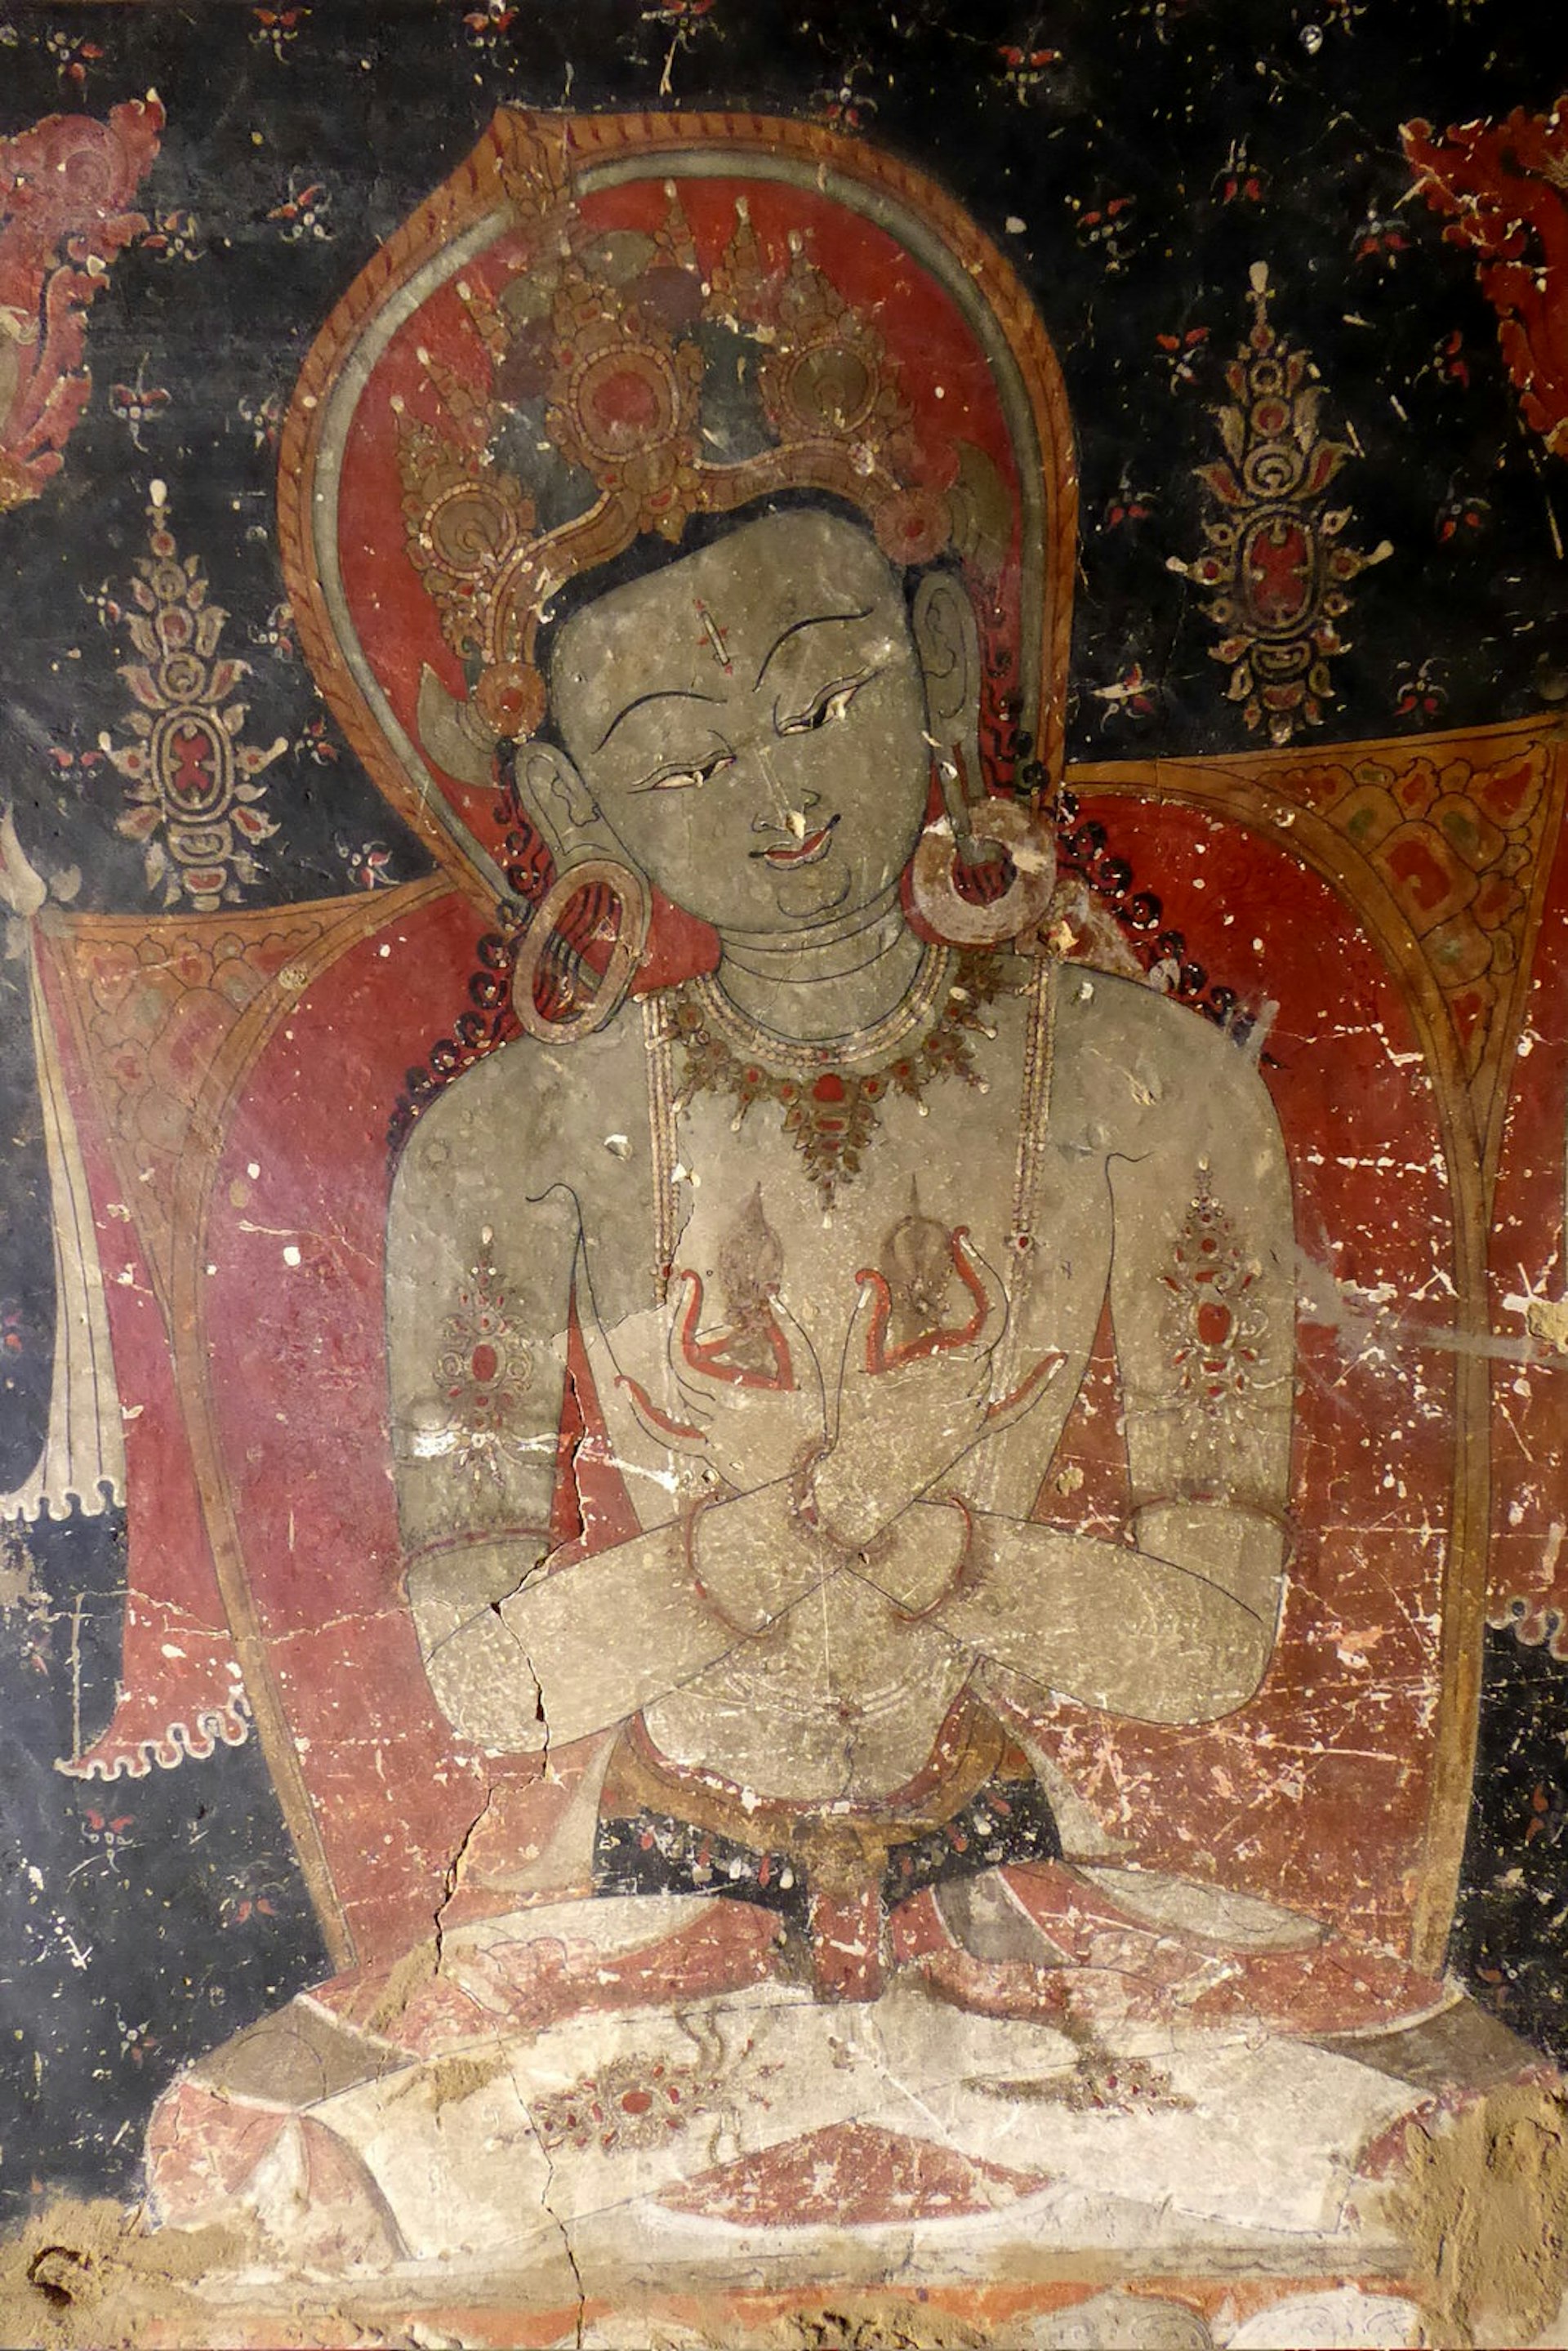 A time-scarred mural showing the clear influence of Tibet